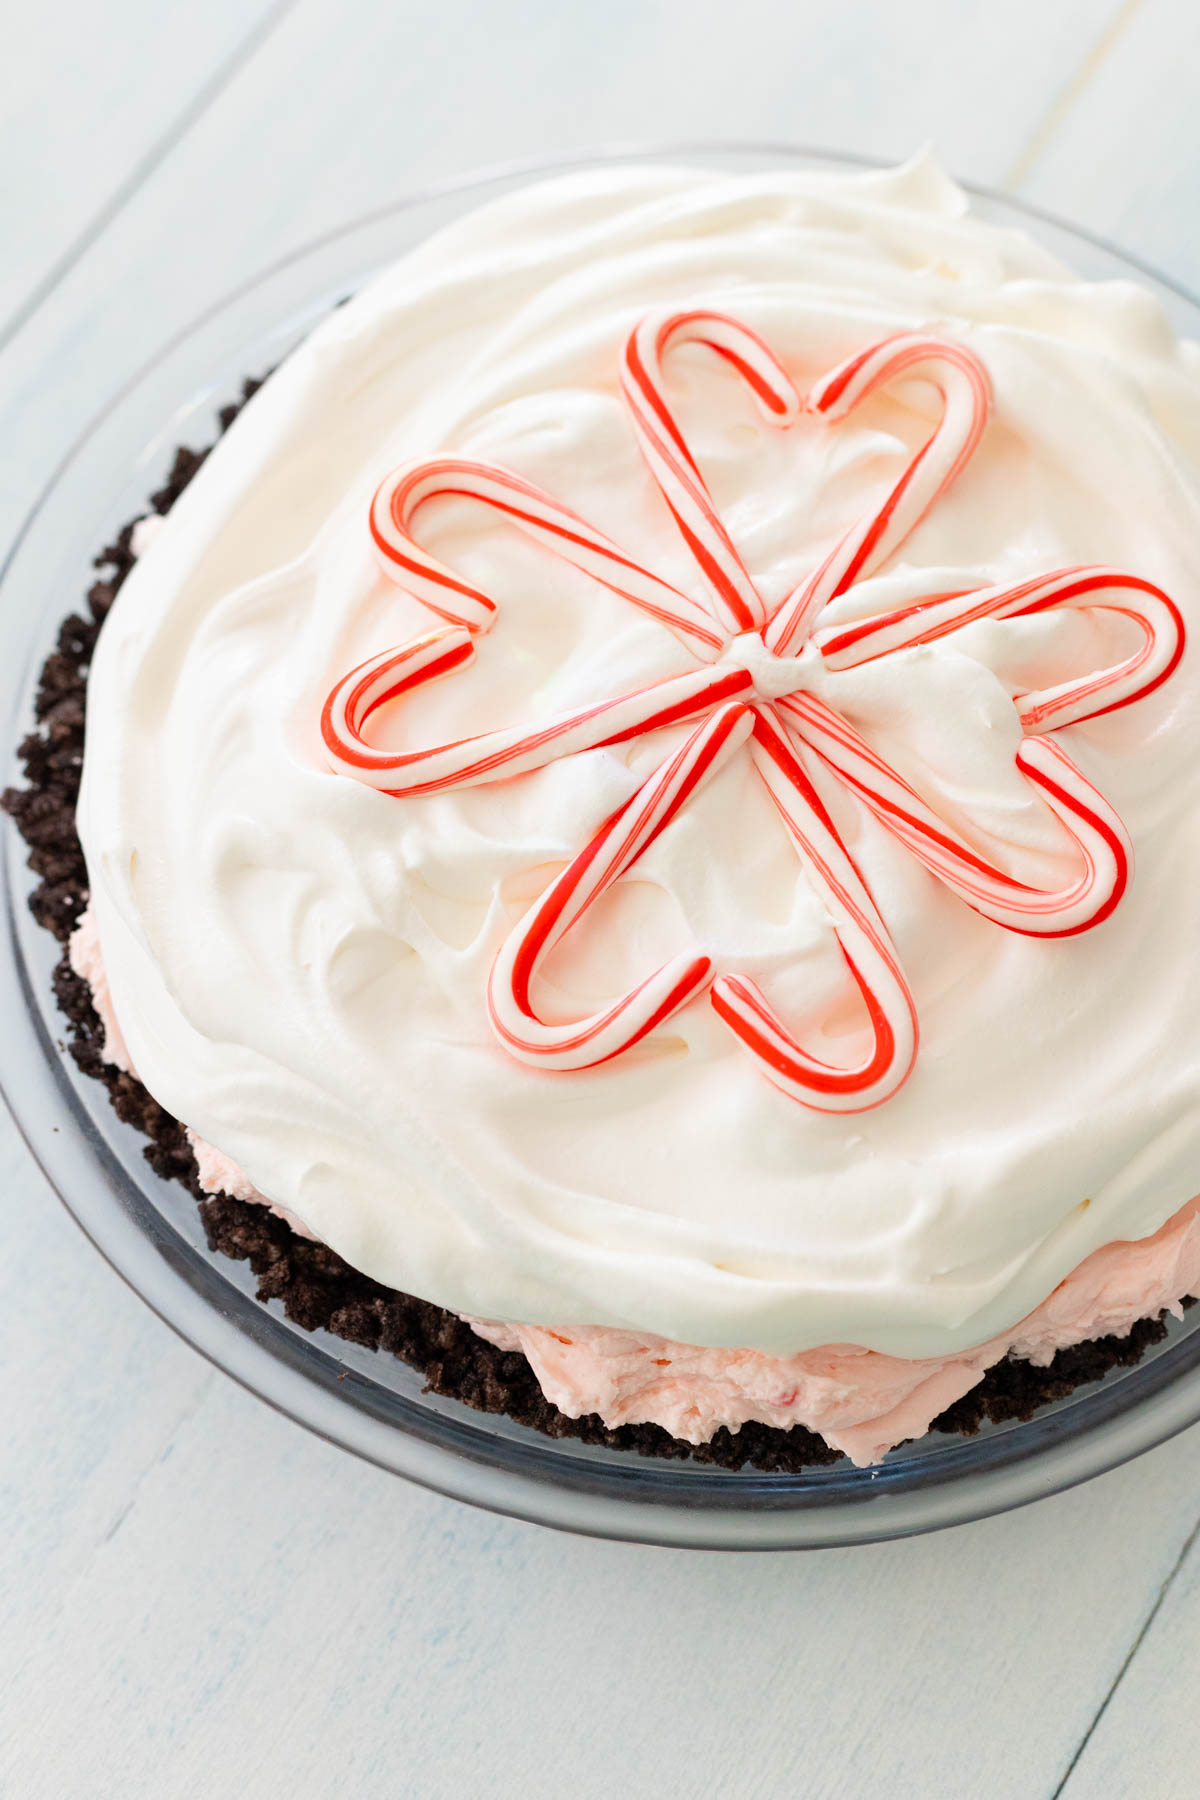 The Christmas dessert has been frosted with Cool Whip and 8 mini candy canes have been arranged to form a heart-shaped snowflake on top.